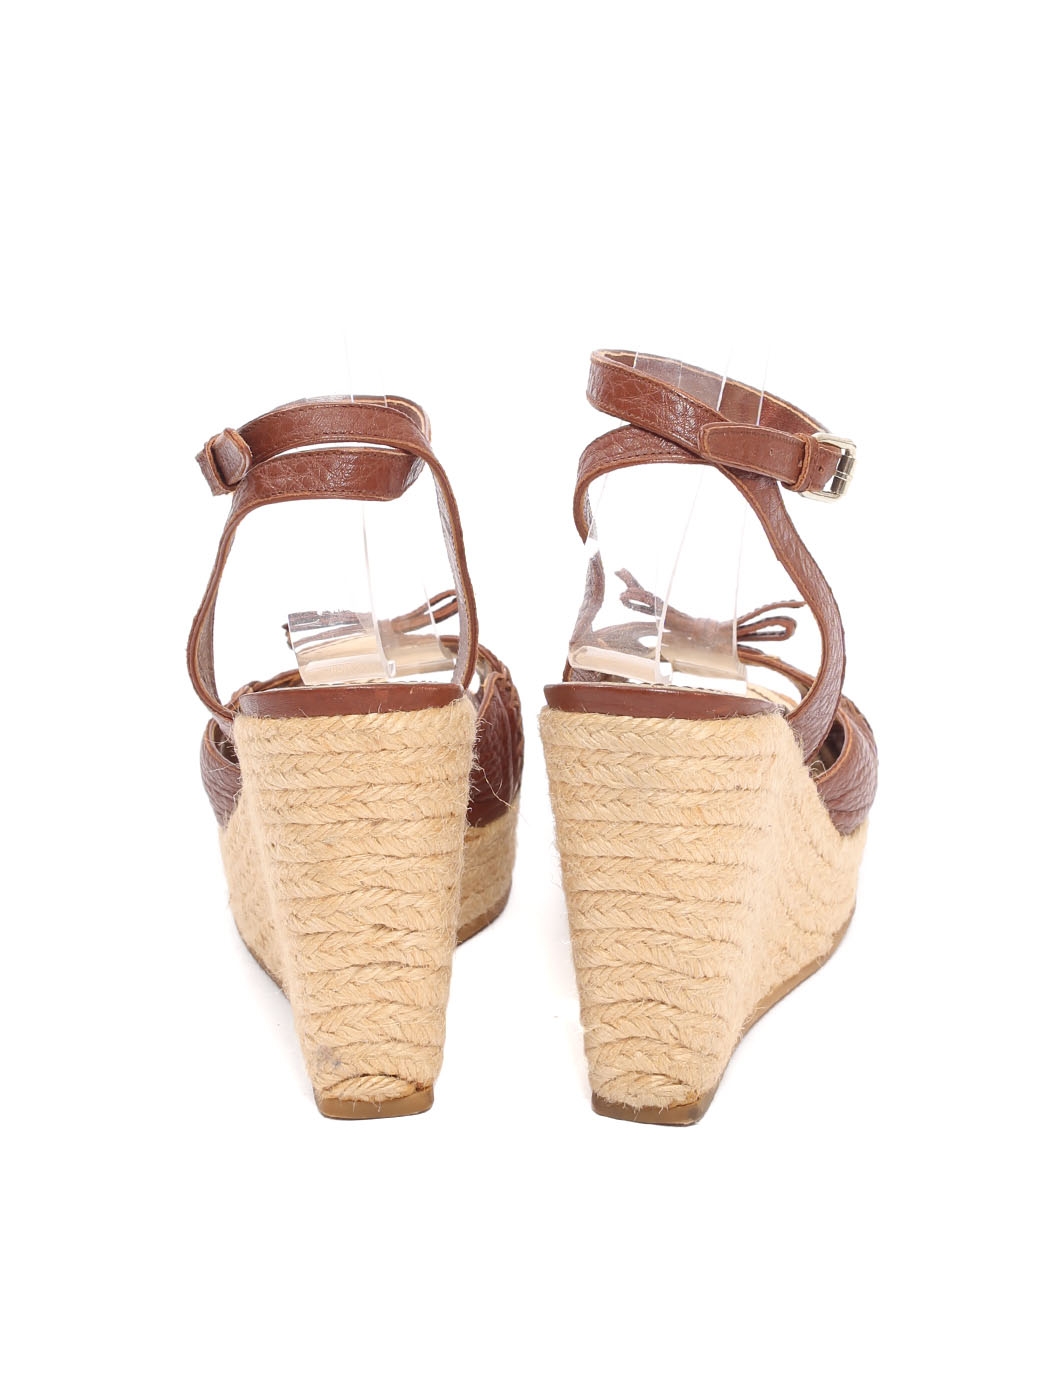 Louis Vuitton White Canvas & Brown Patent Leather Bow Espadrille Wedge  Sandals